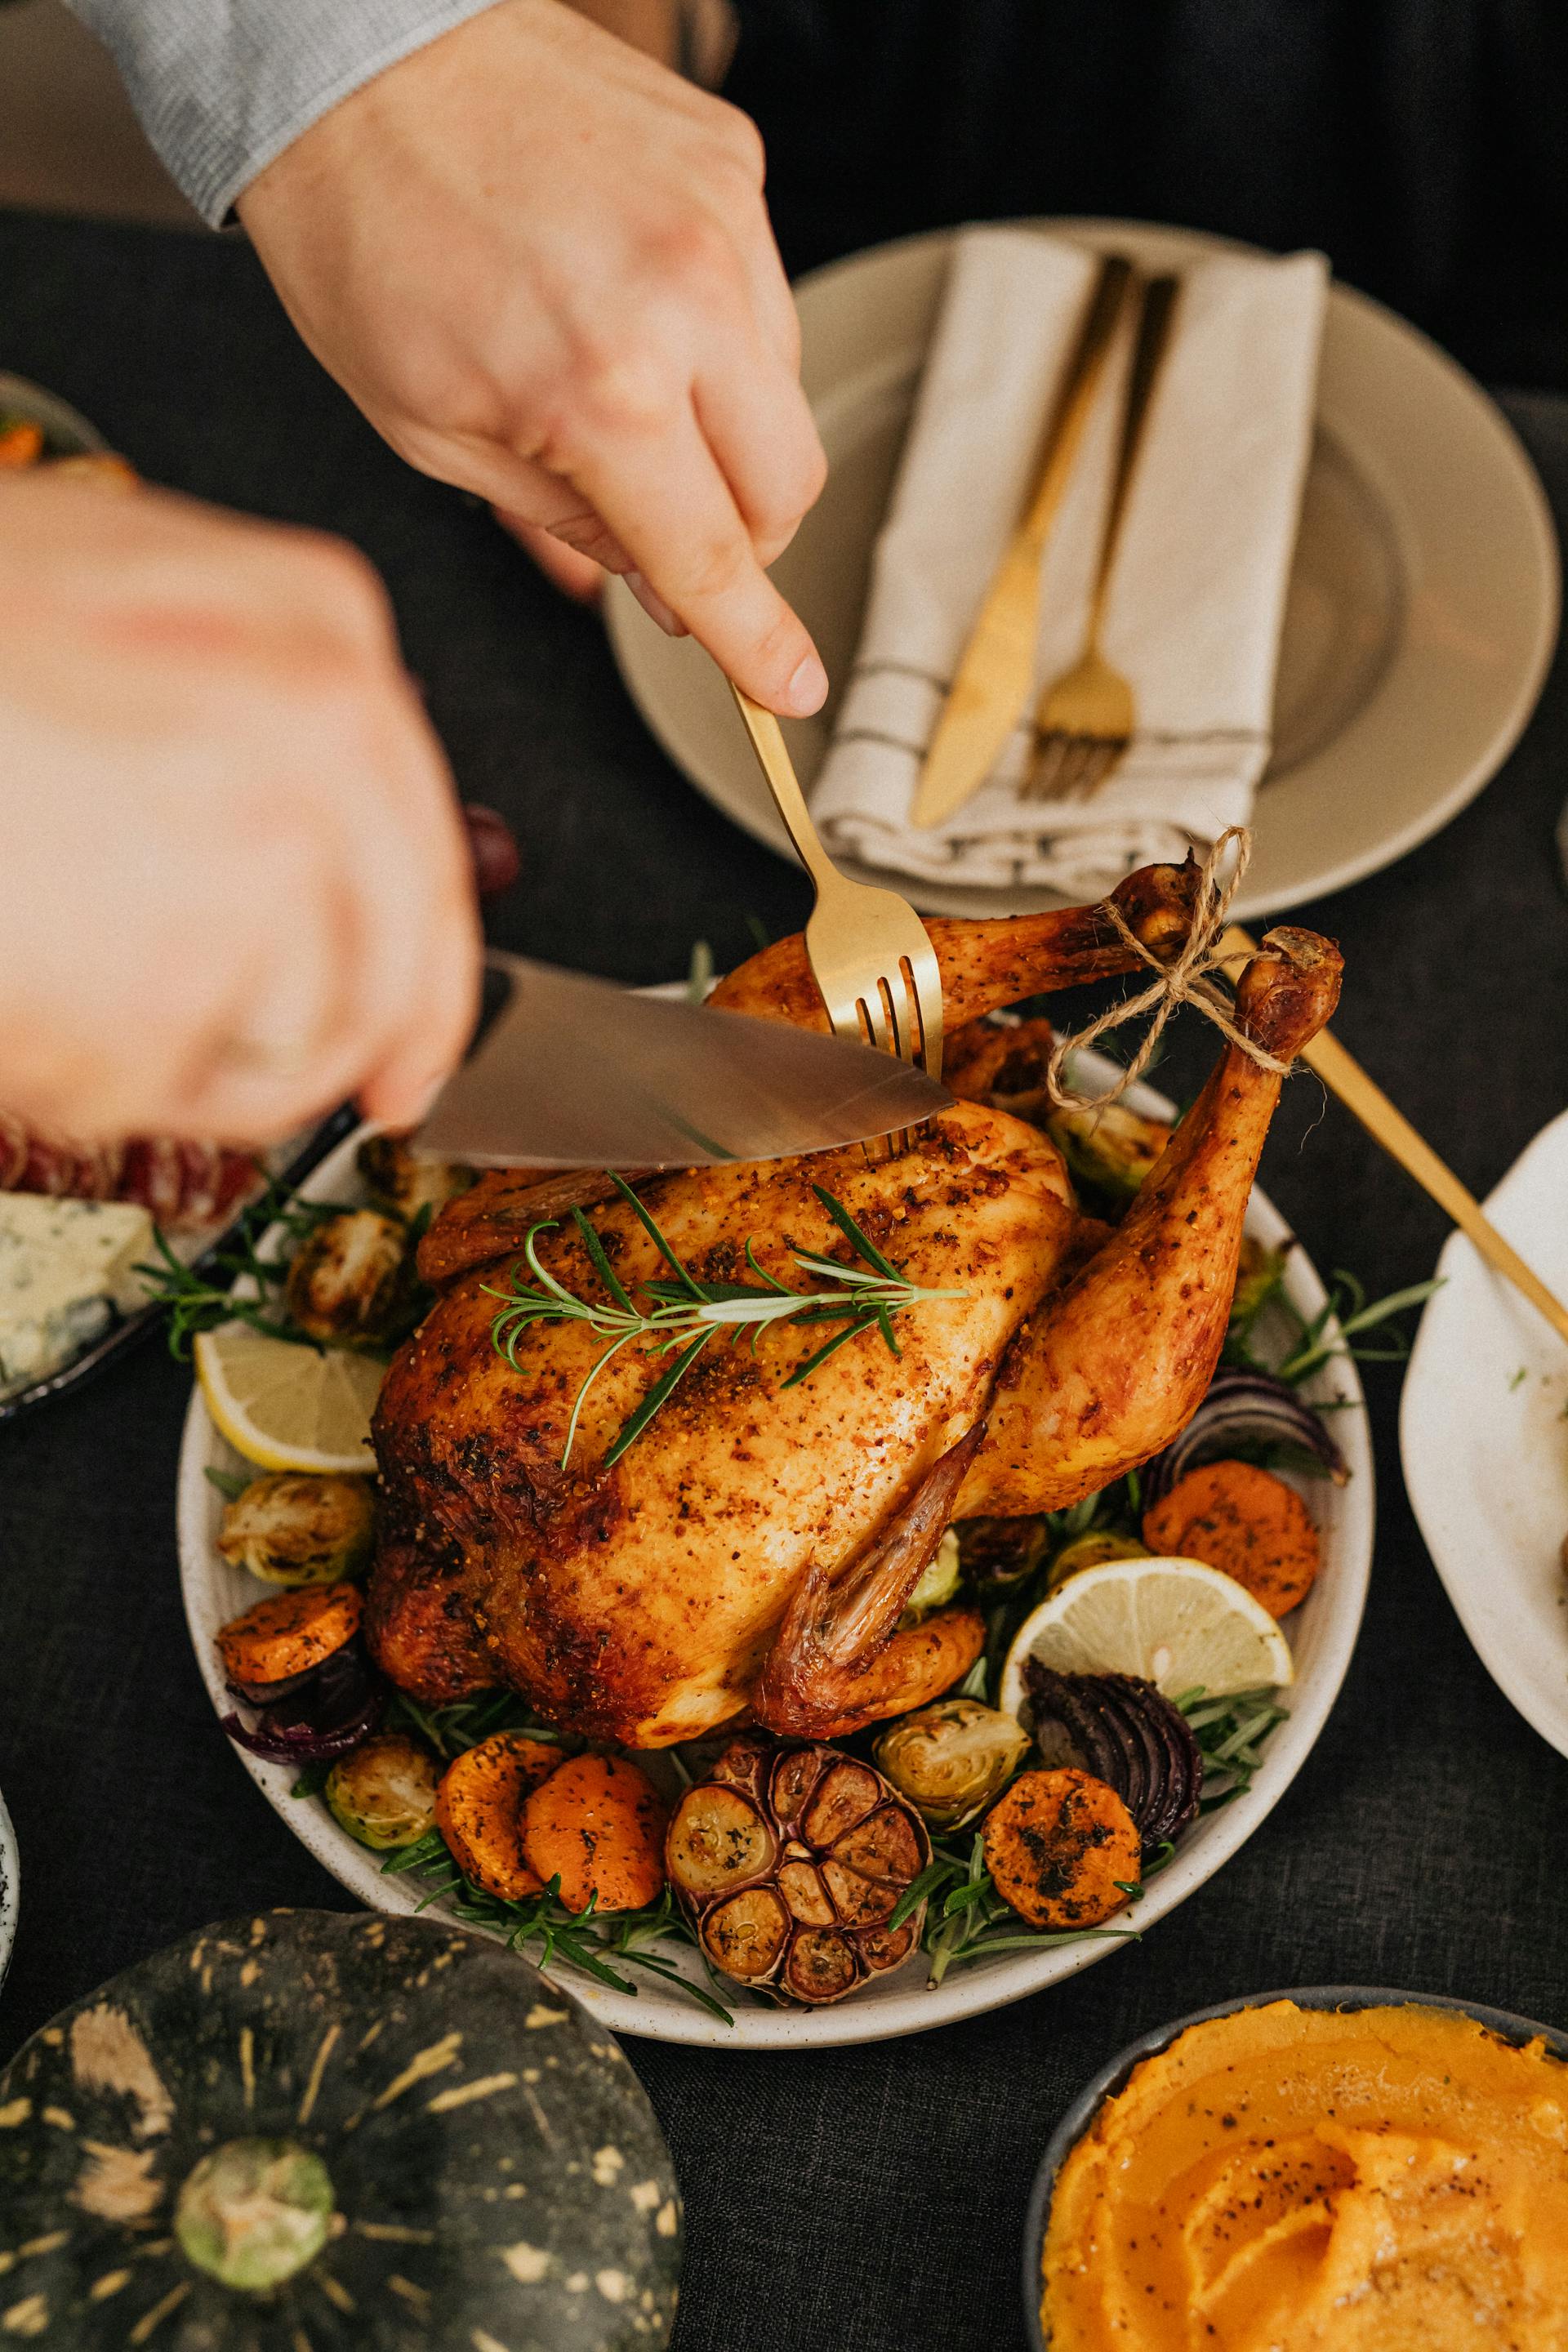 A person cutting a turkey during Thanksgiving dinner | Source: Pexels